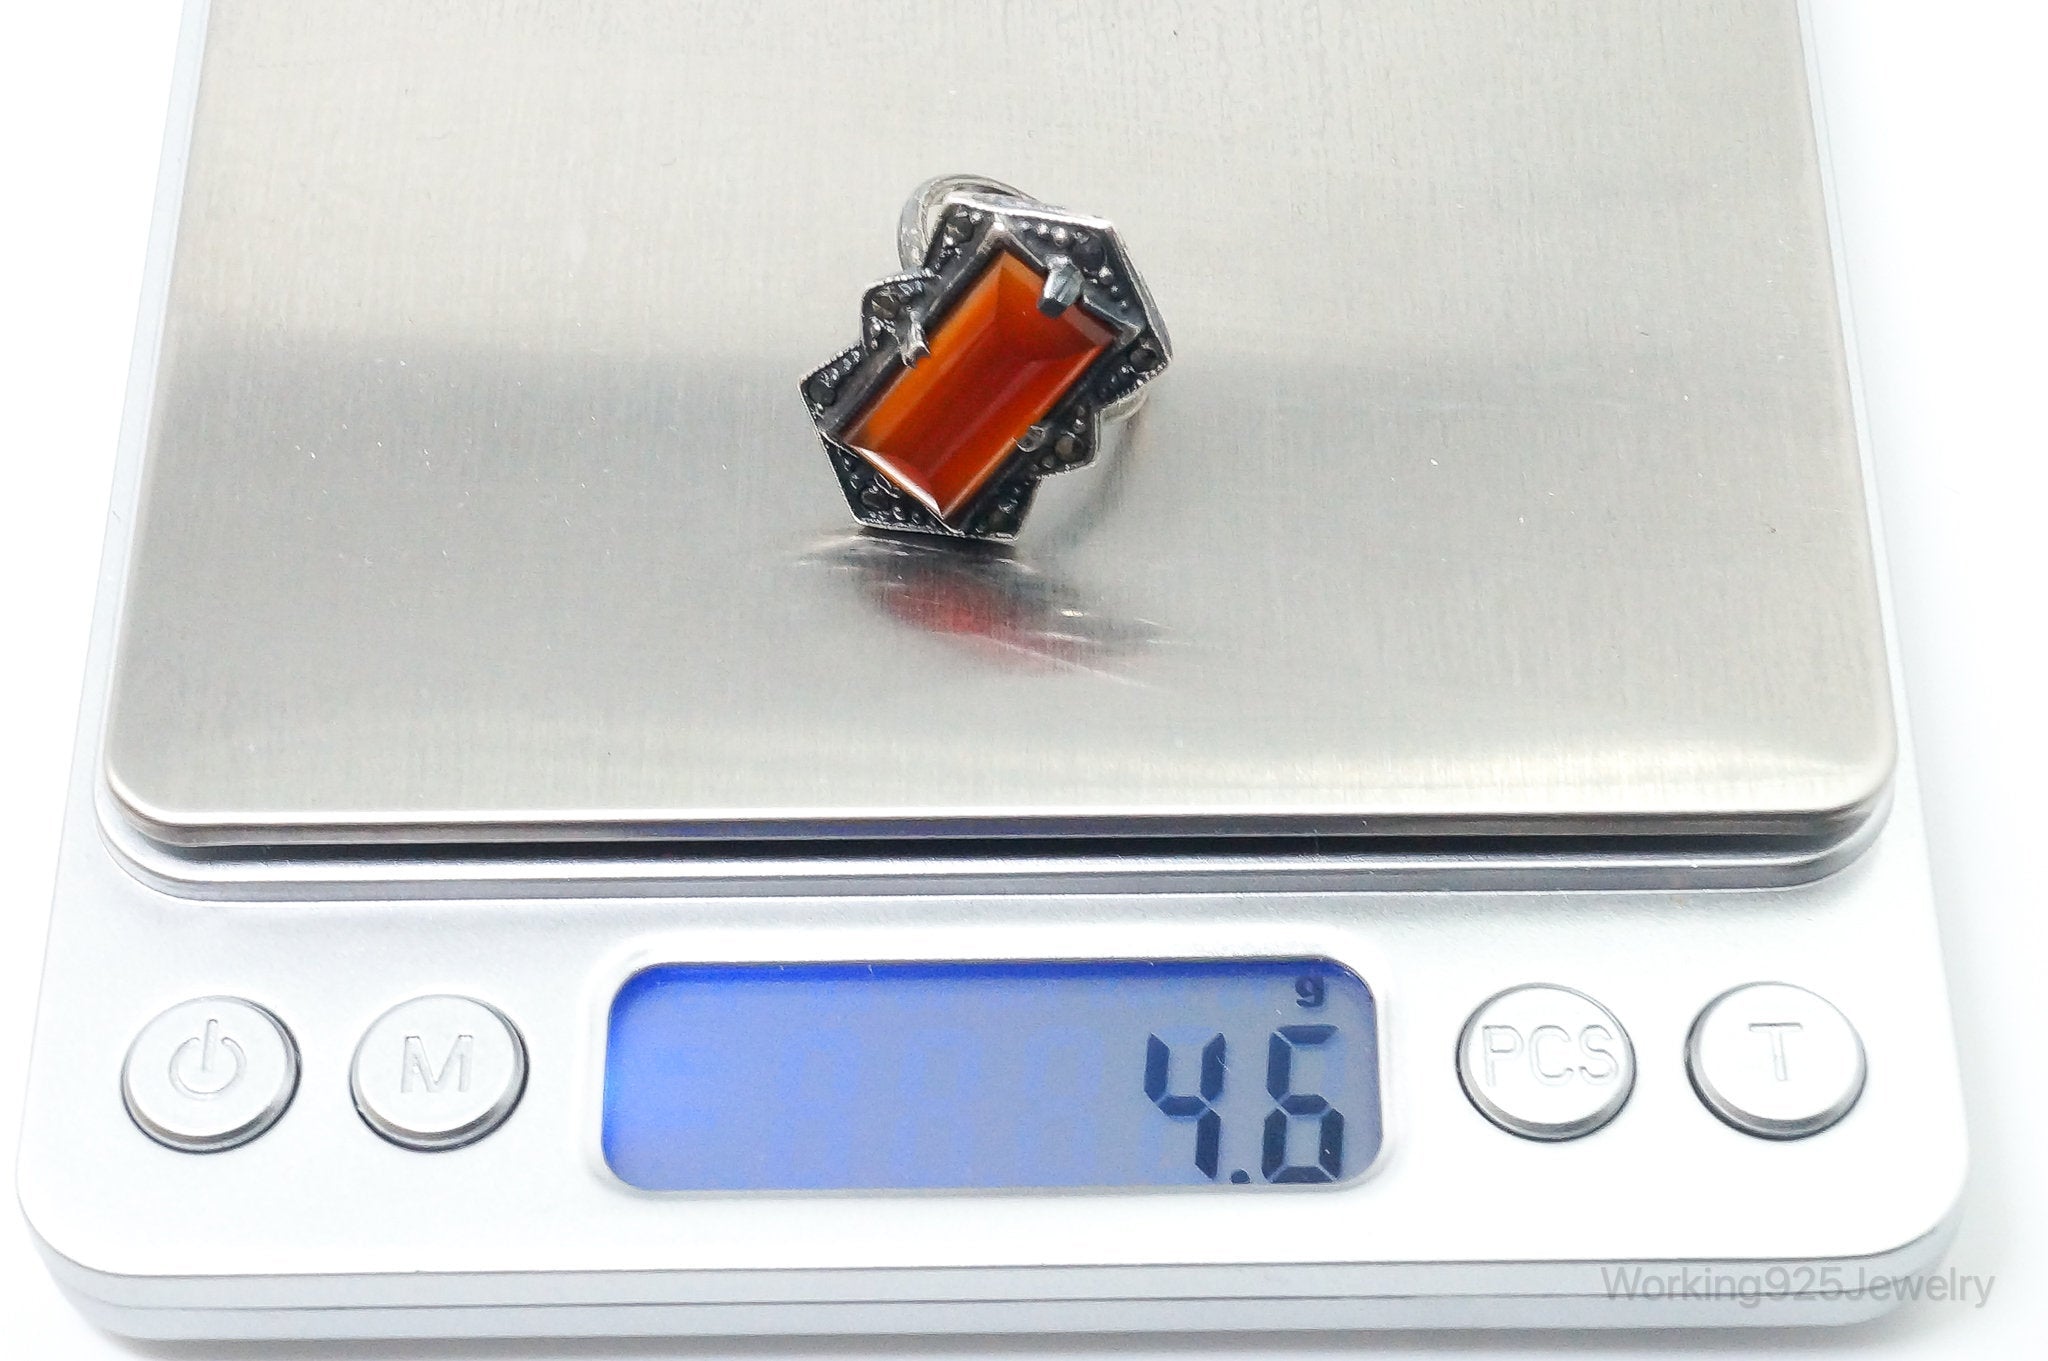 Antique Victorian Carnelian Marcasite Sterling Silver Ring - SZ 4.75